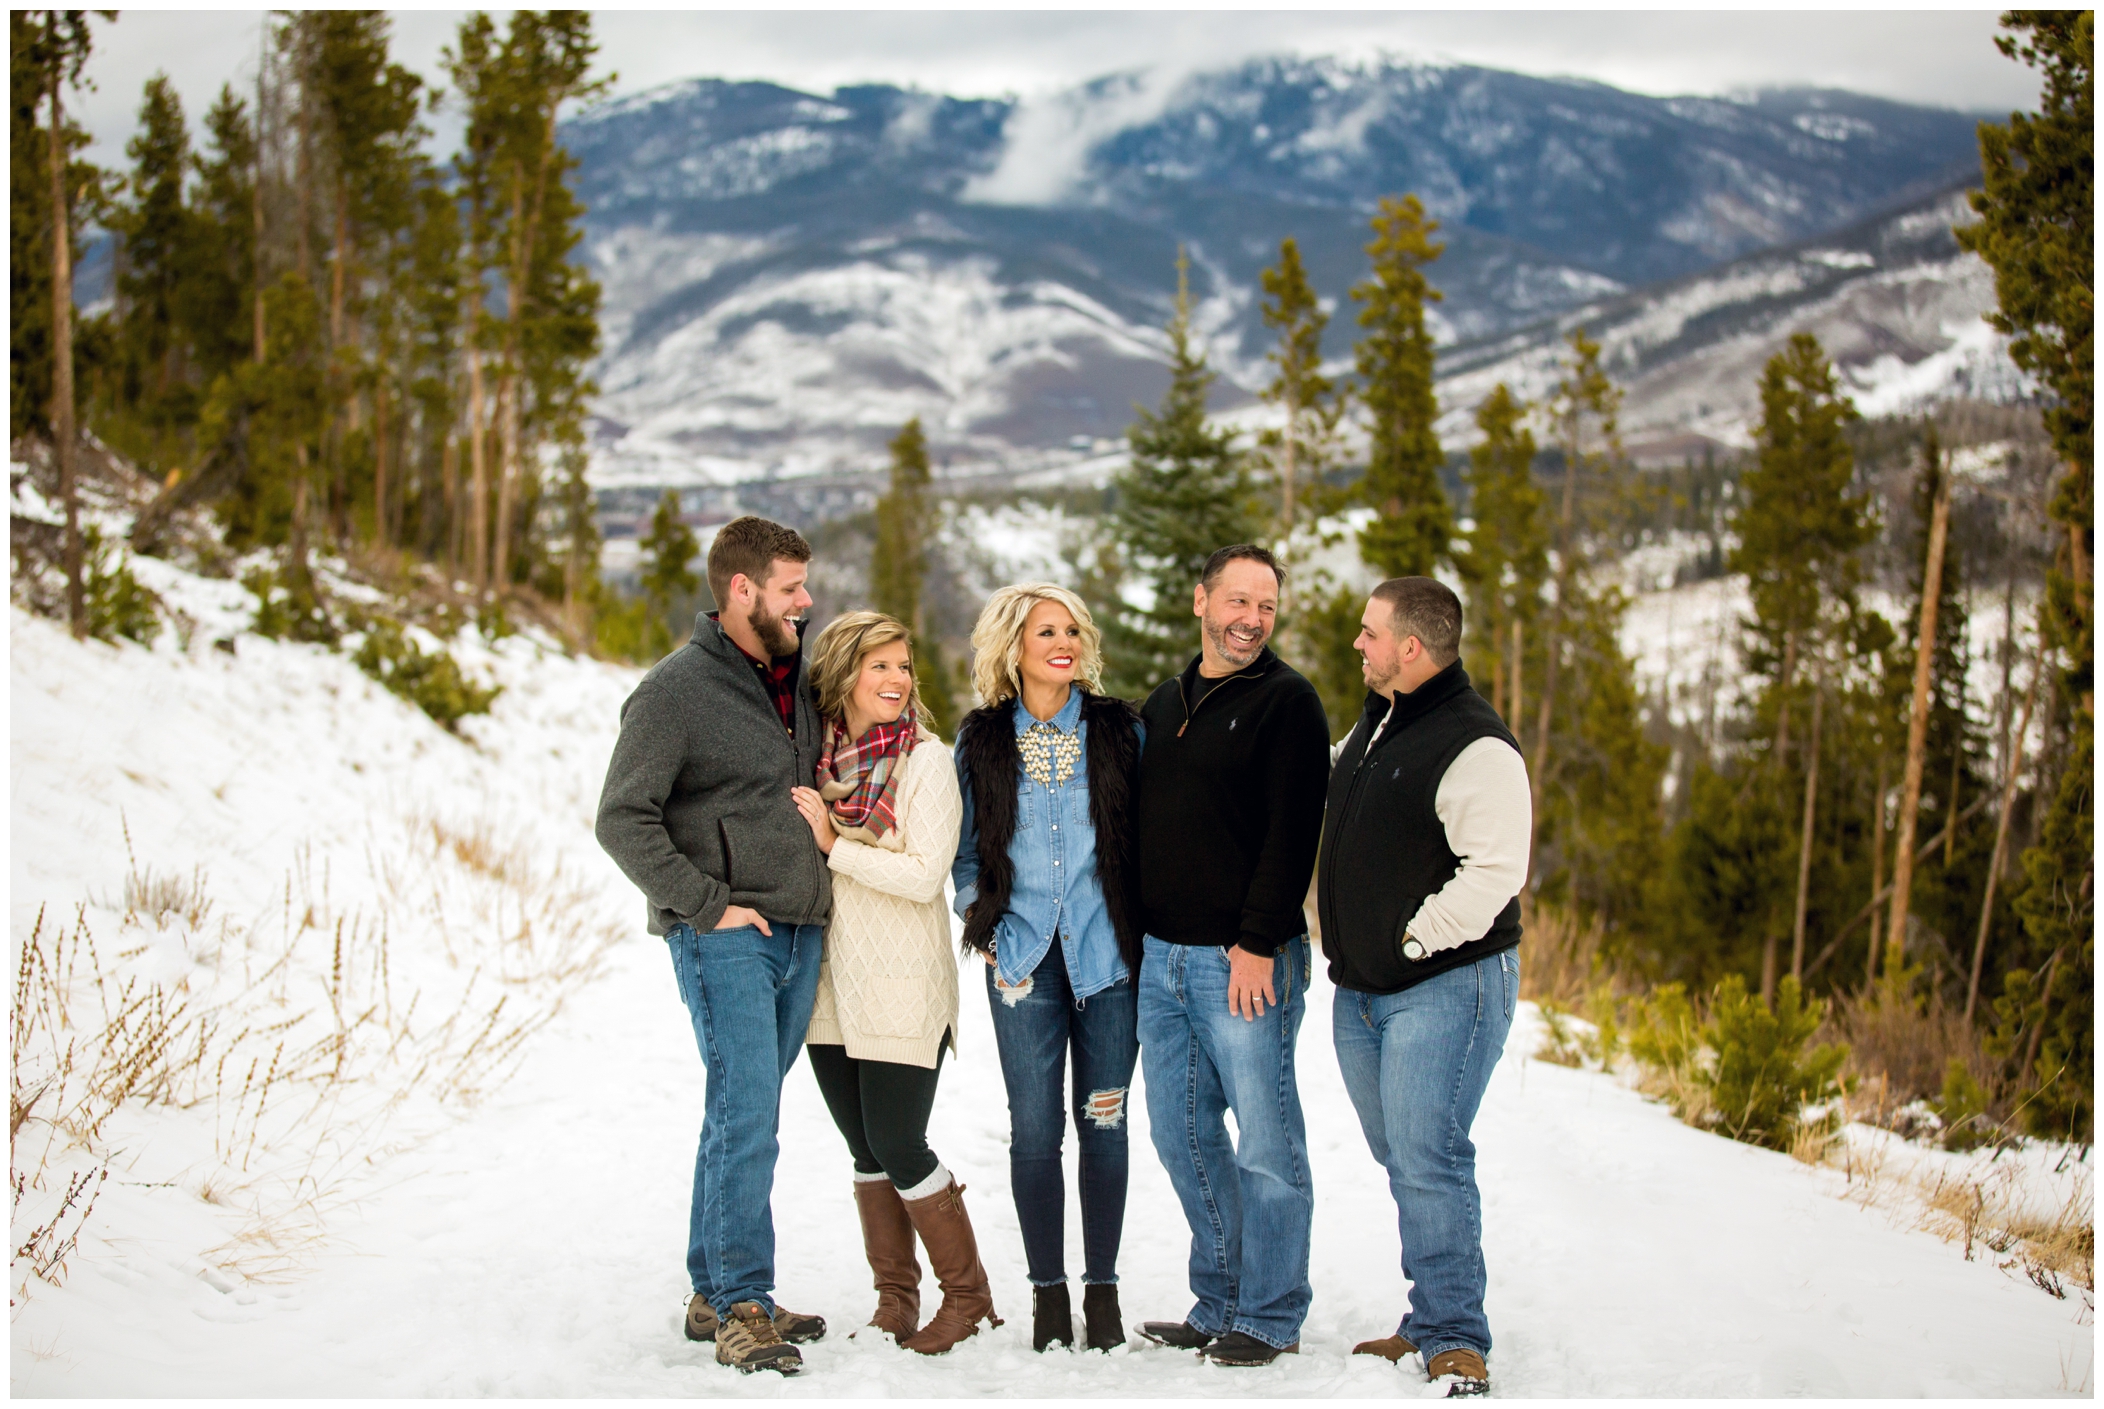 Breckenridge family photography at Sapphire Point in the snowy colorado mountains